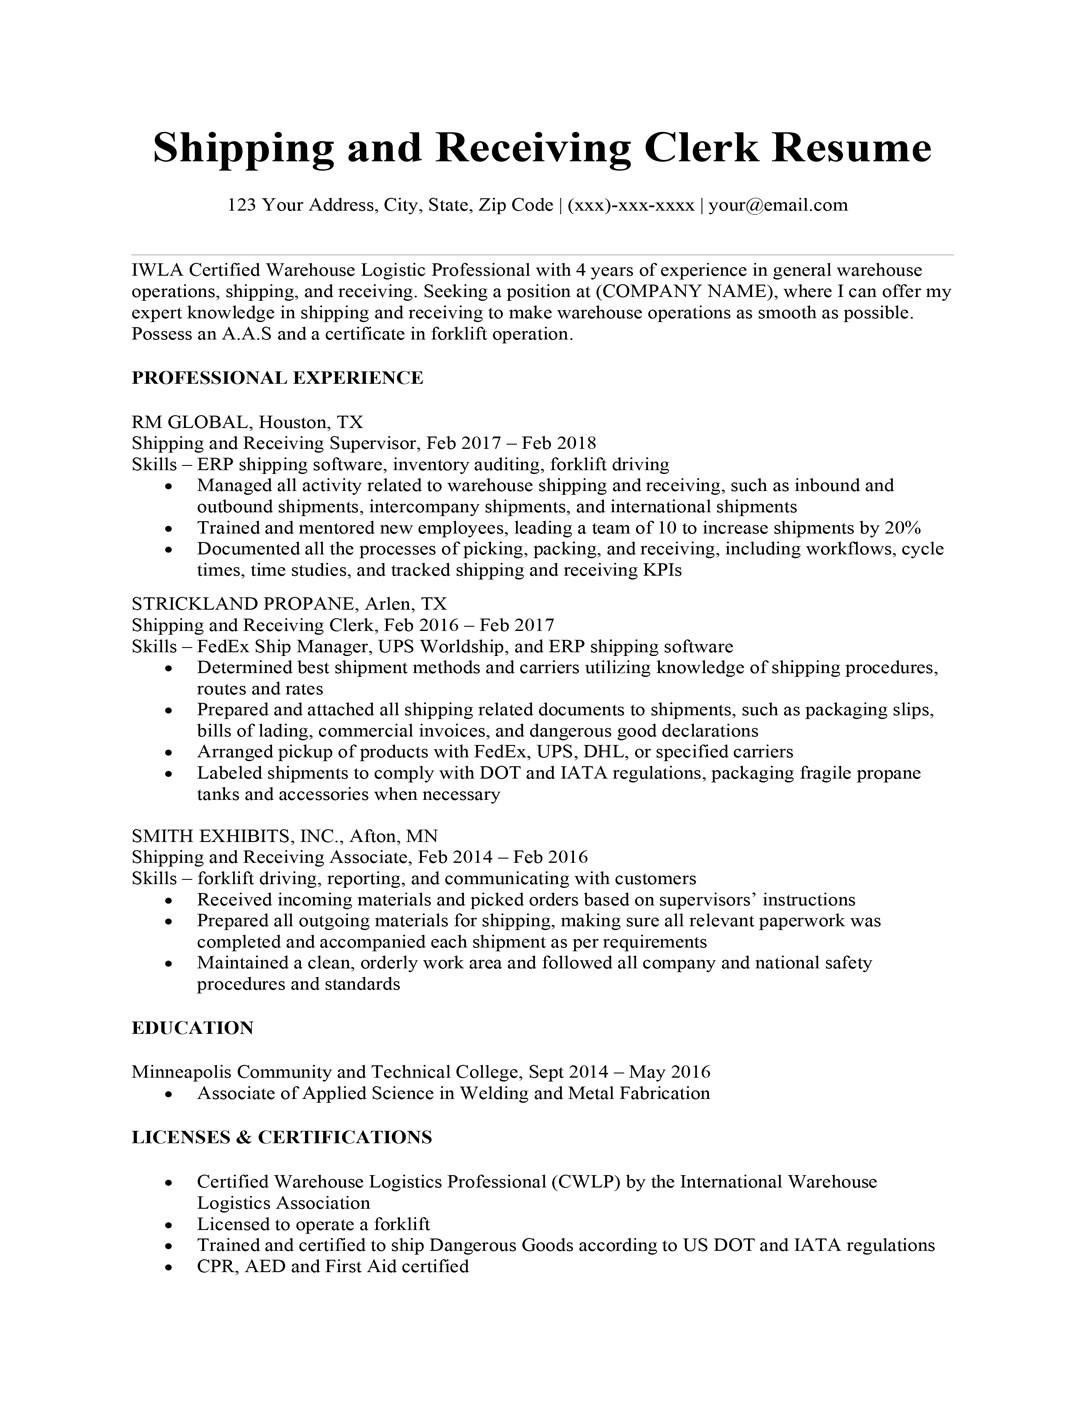 shipping and receiving resume sample